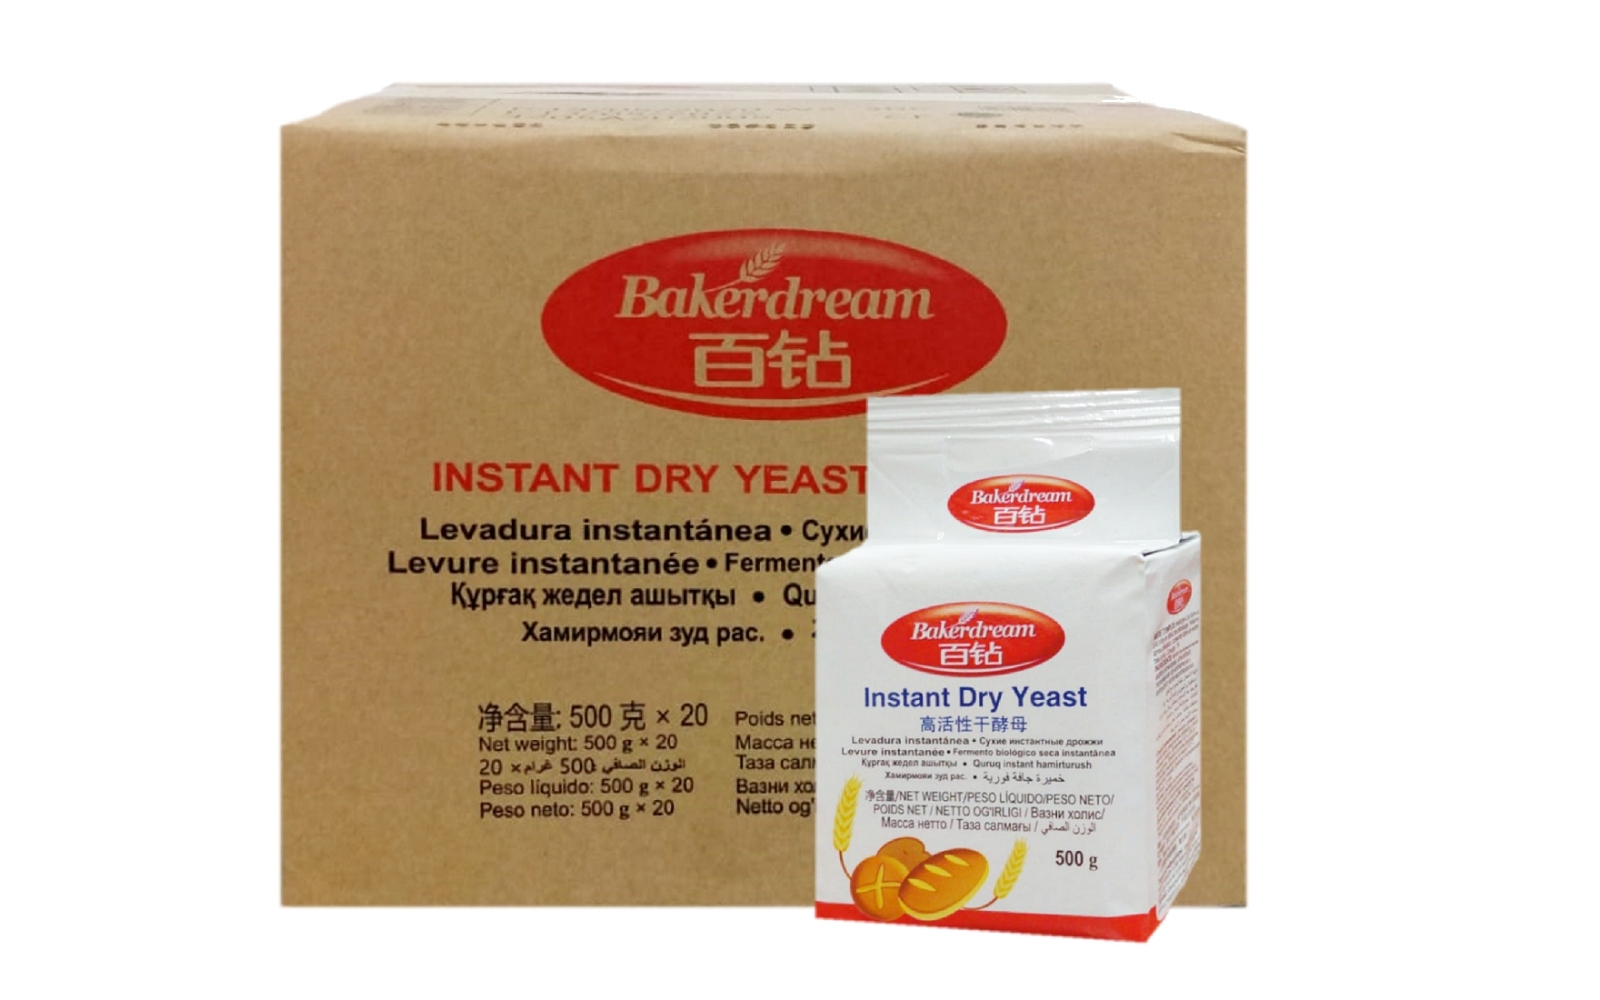 BakerDream Low Sugar Instant Dry Yeast 20 x 500g